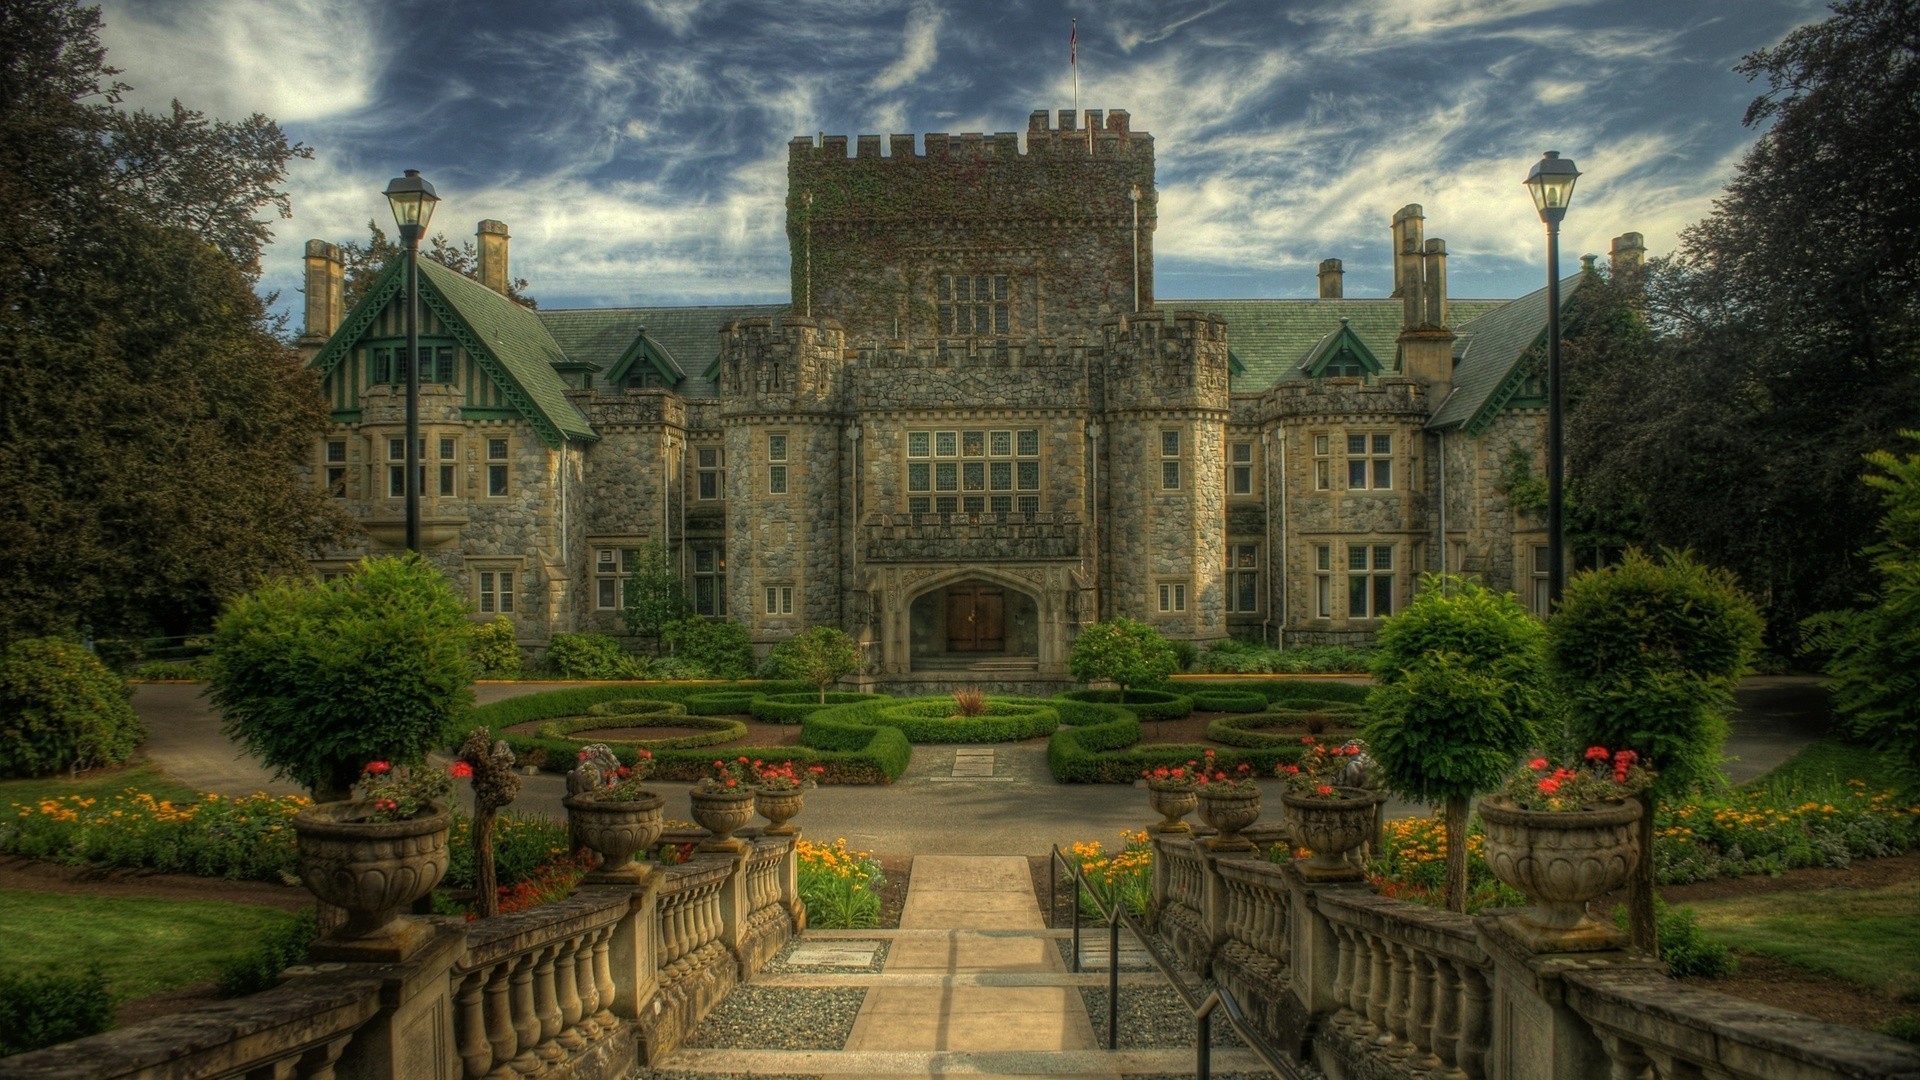 General 1920x1080 architecture castle trees Canada HDR park clouds flowers fence